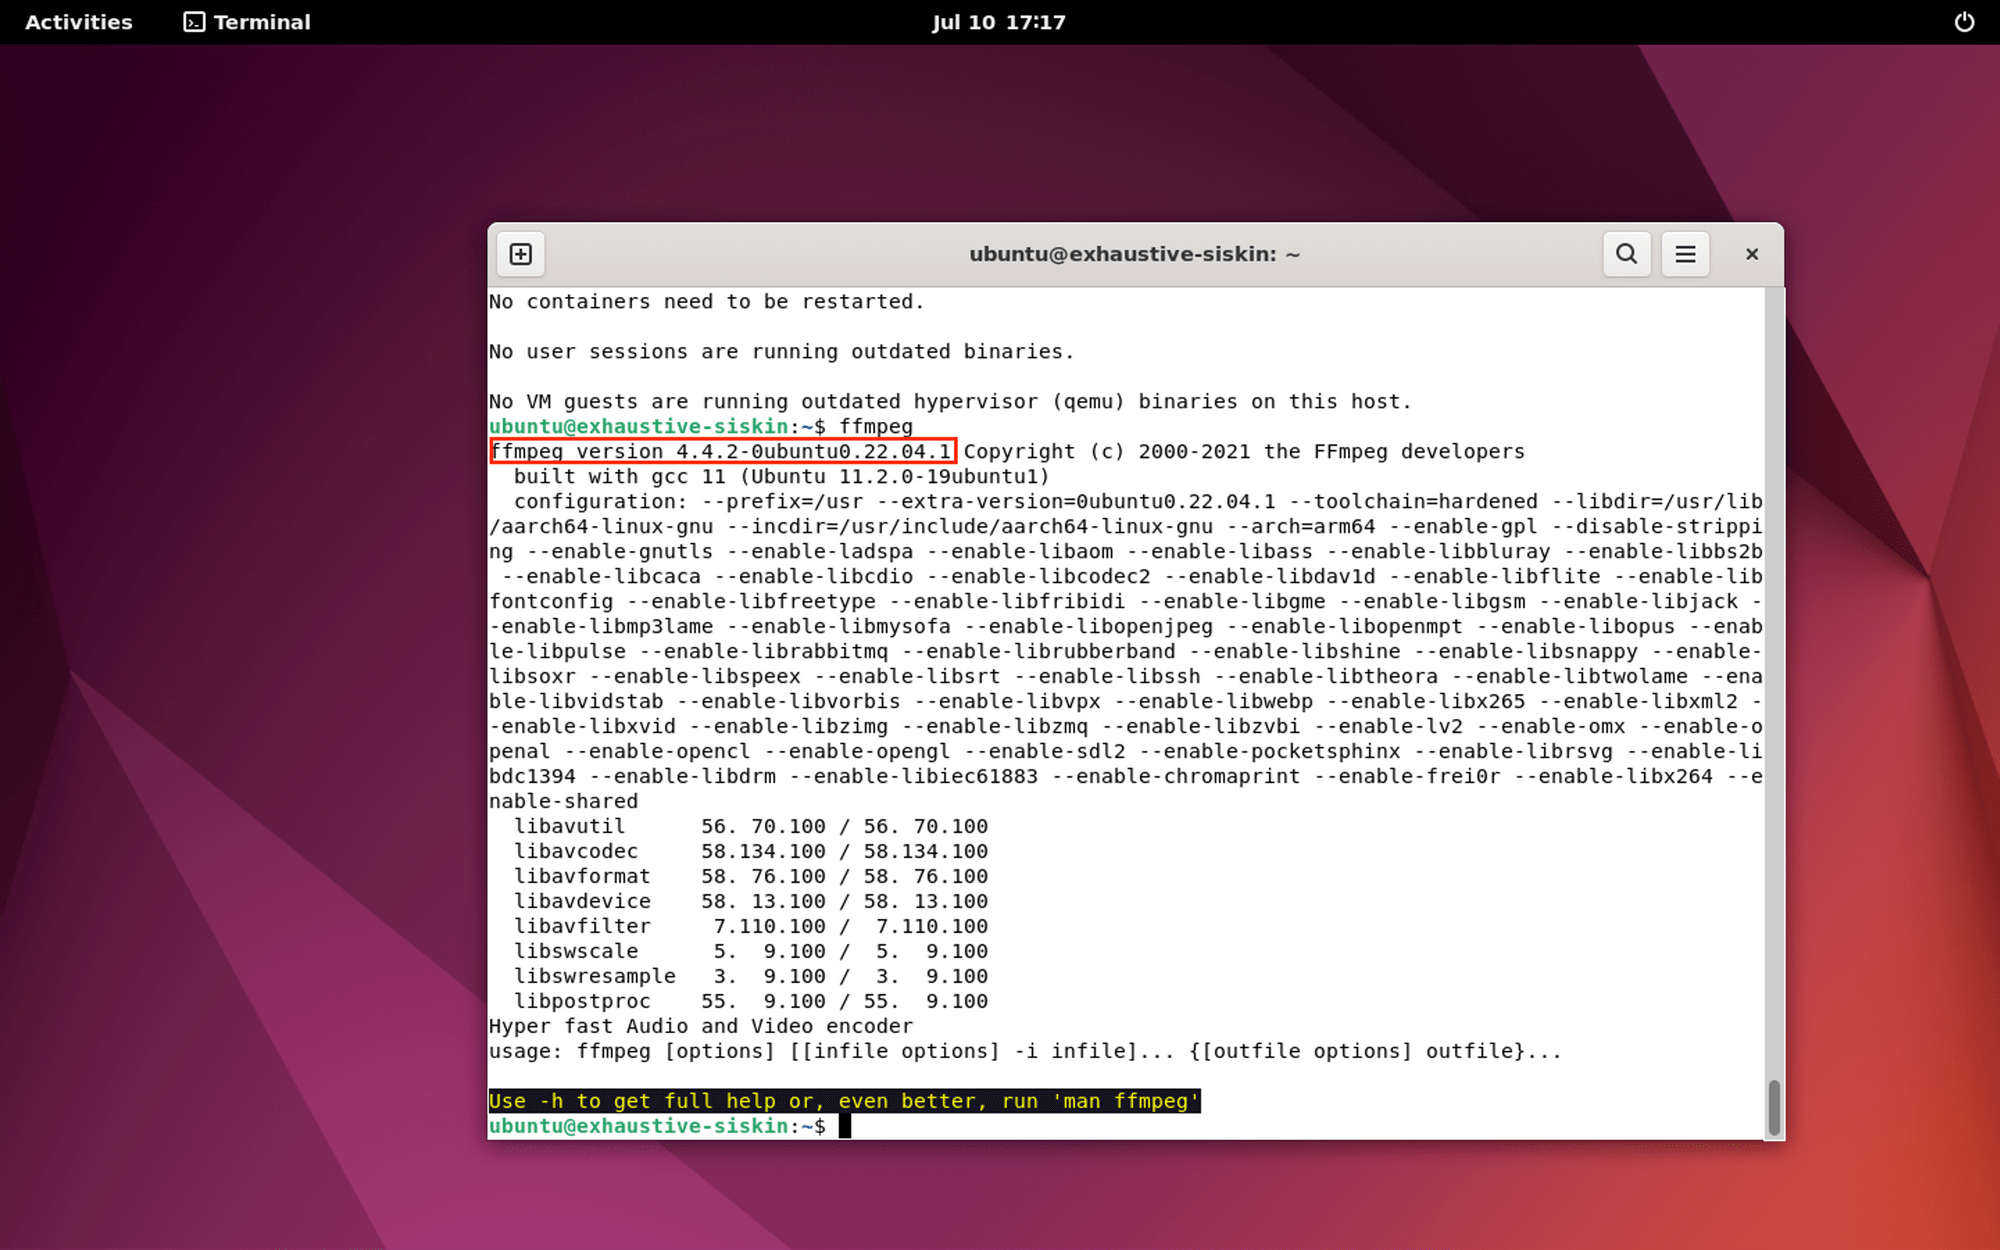 an output of the 'ffmpeg' command after installing it on Ubuntu